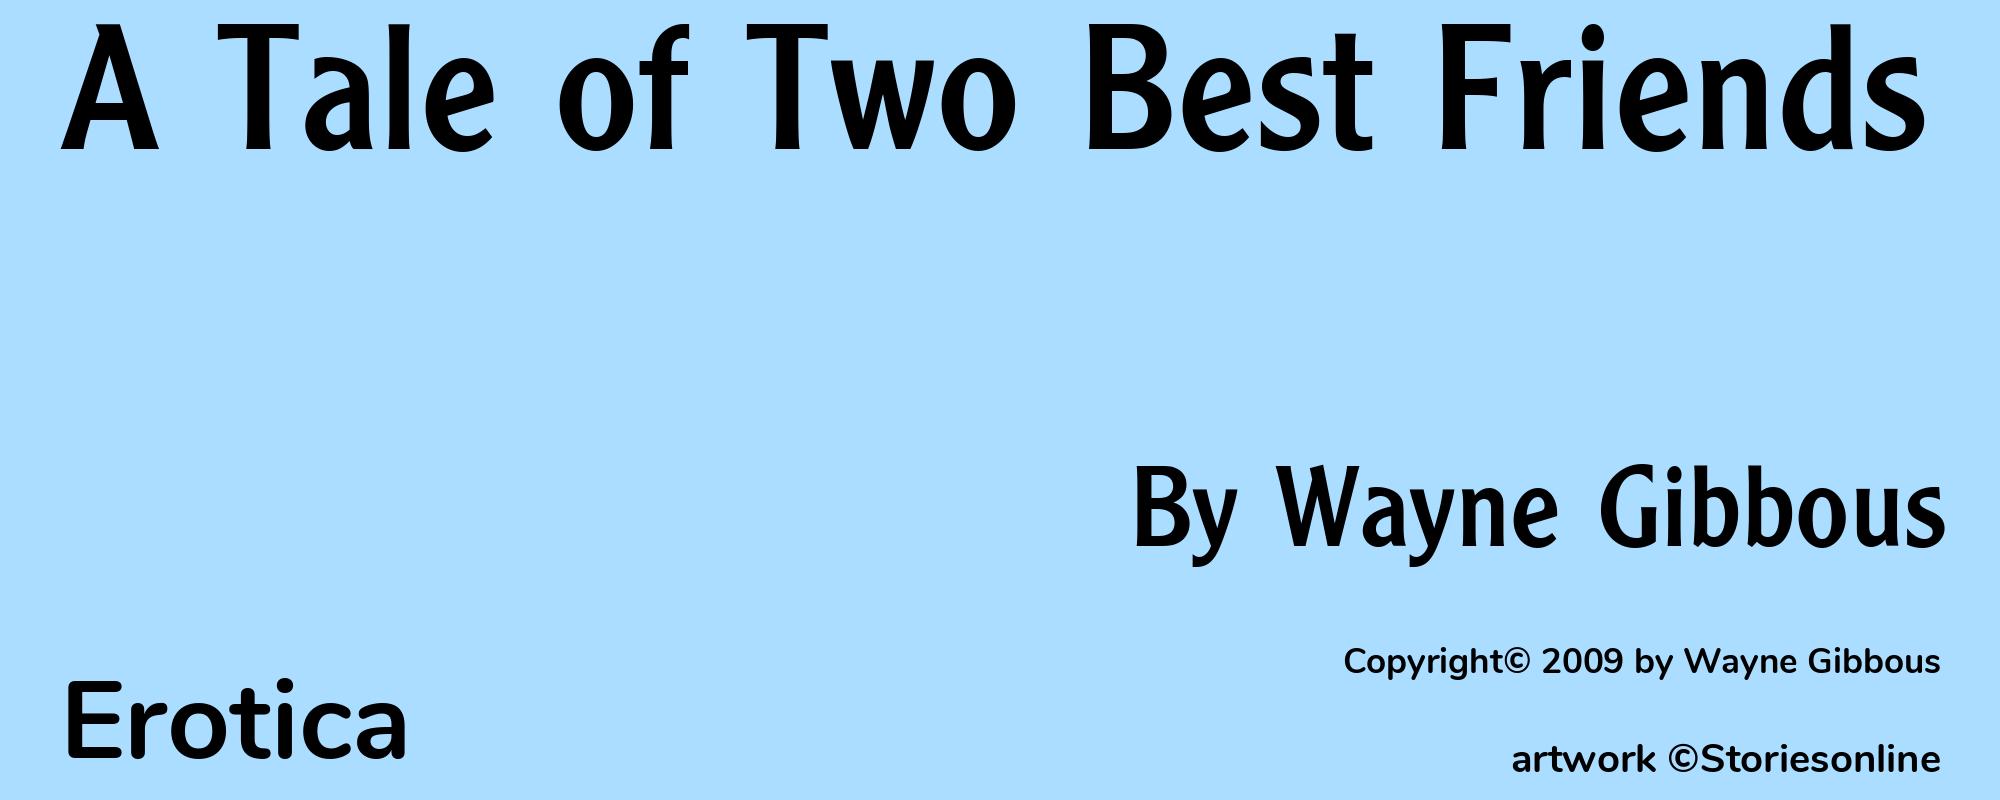 A Tale of Two Best Friends - Cover